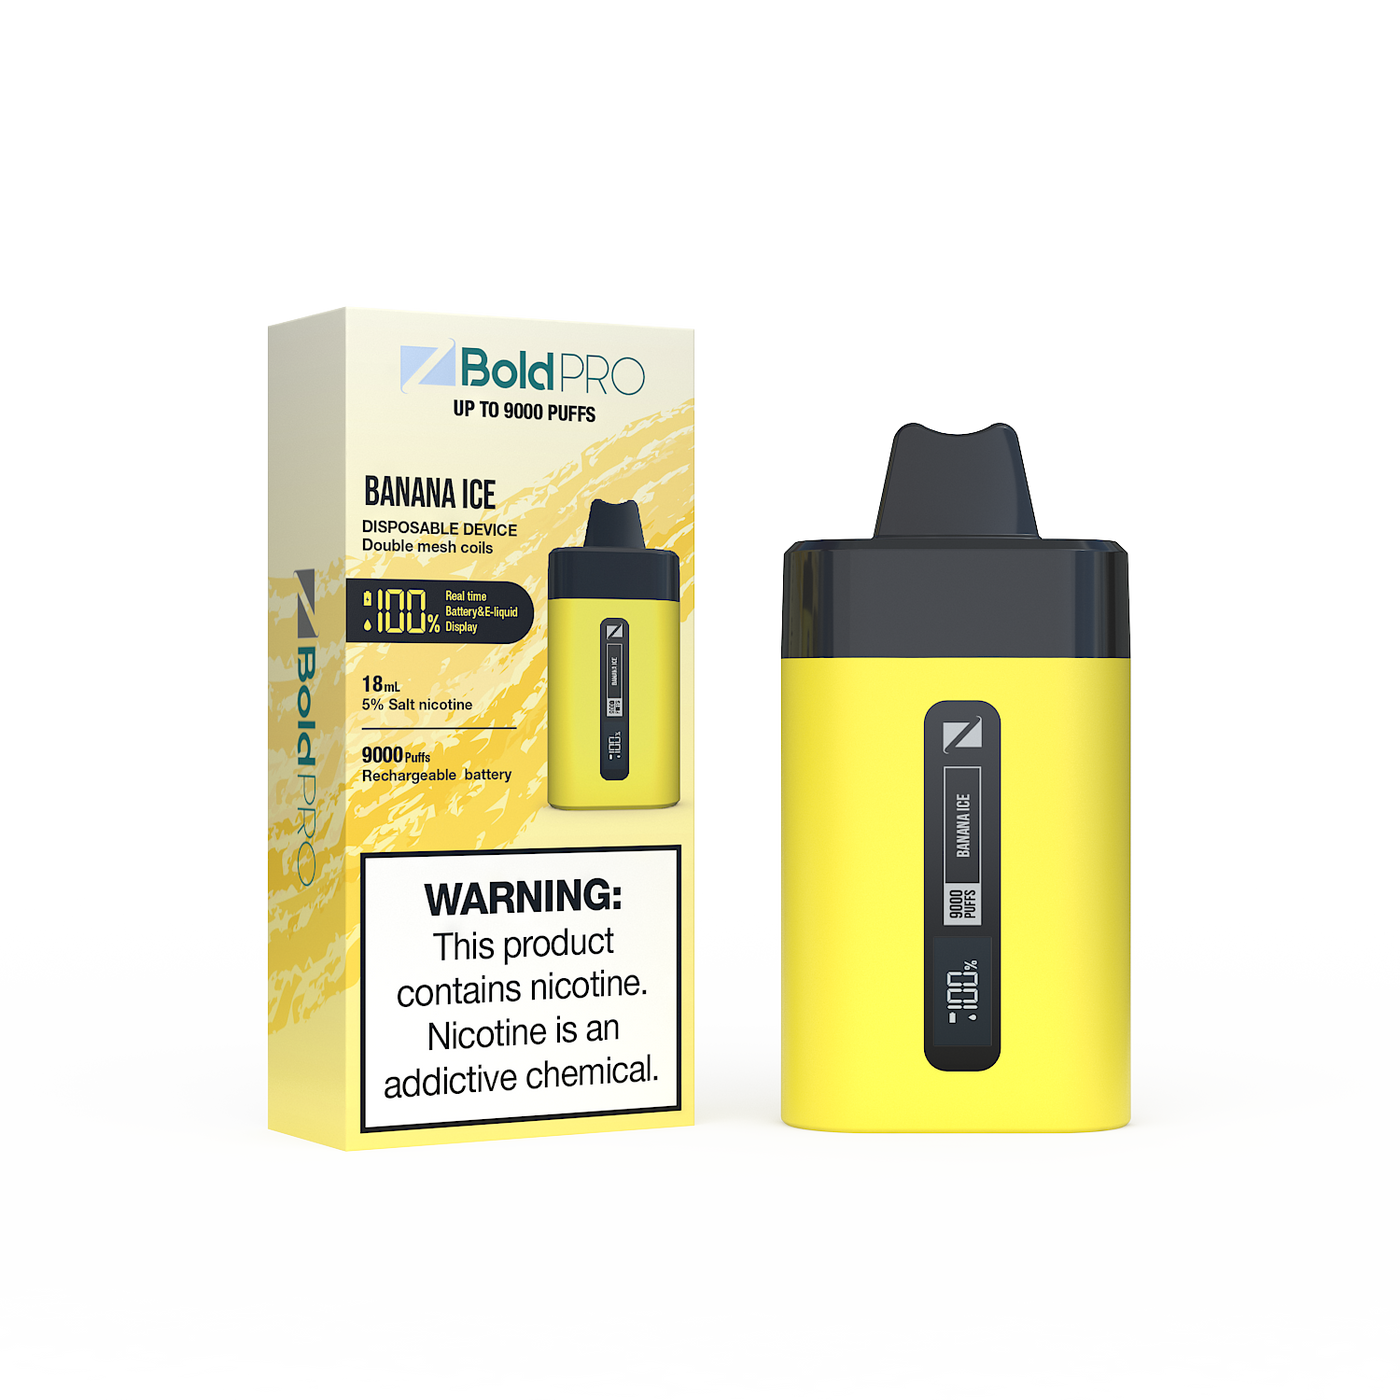 Z Bold Pro - Banana Ice - 9000 Puffs - LED Screen with Juice and Battery Indicator